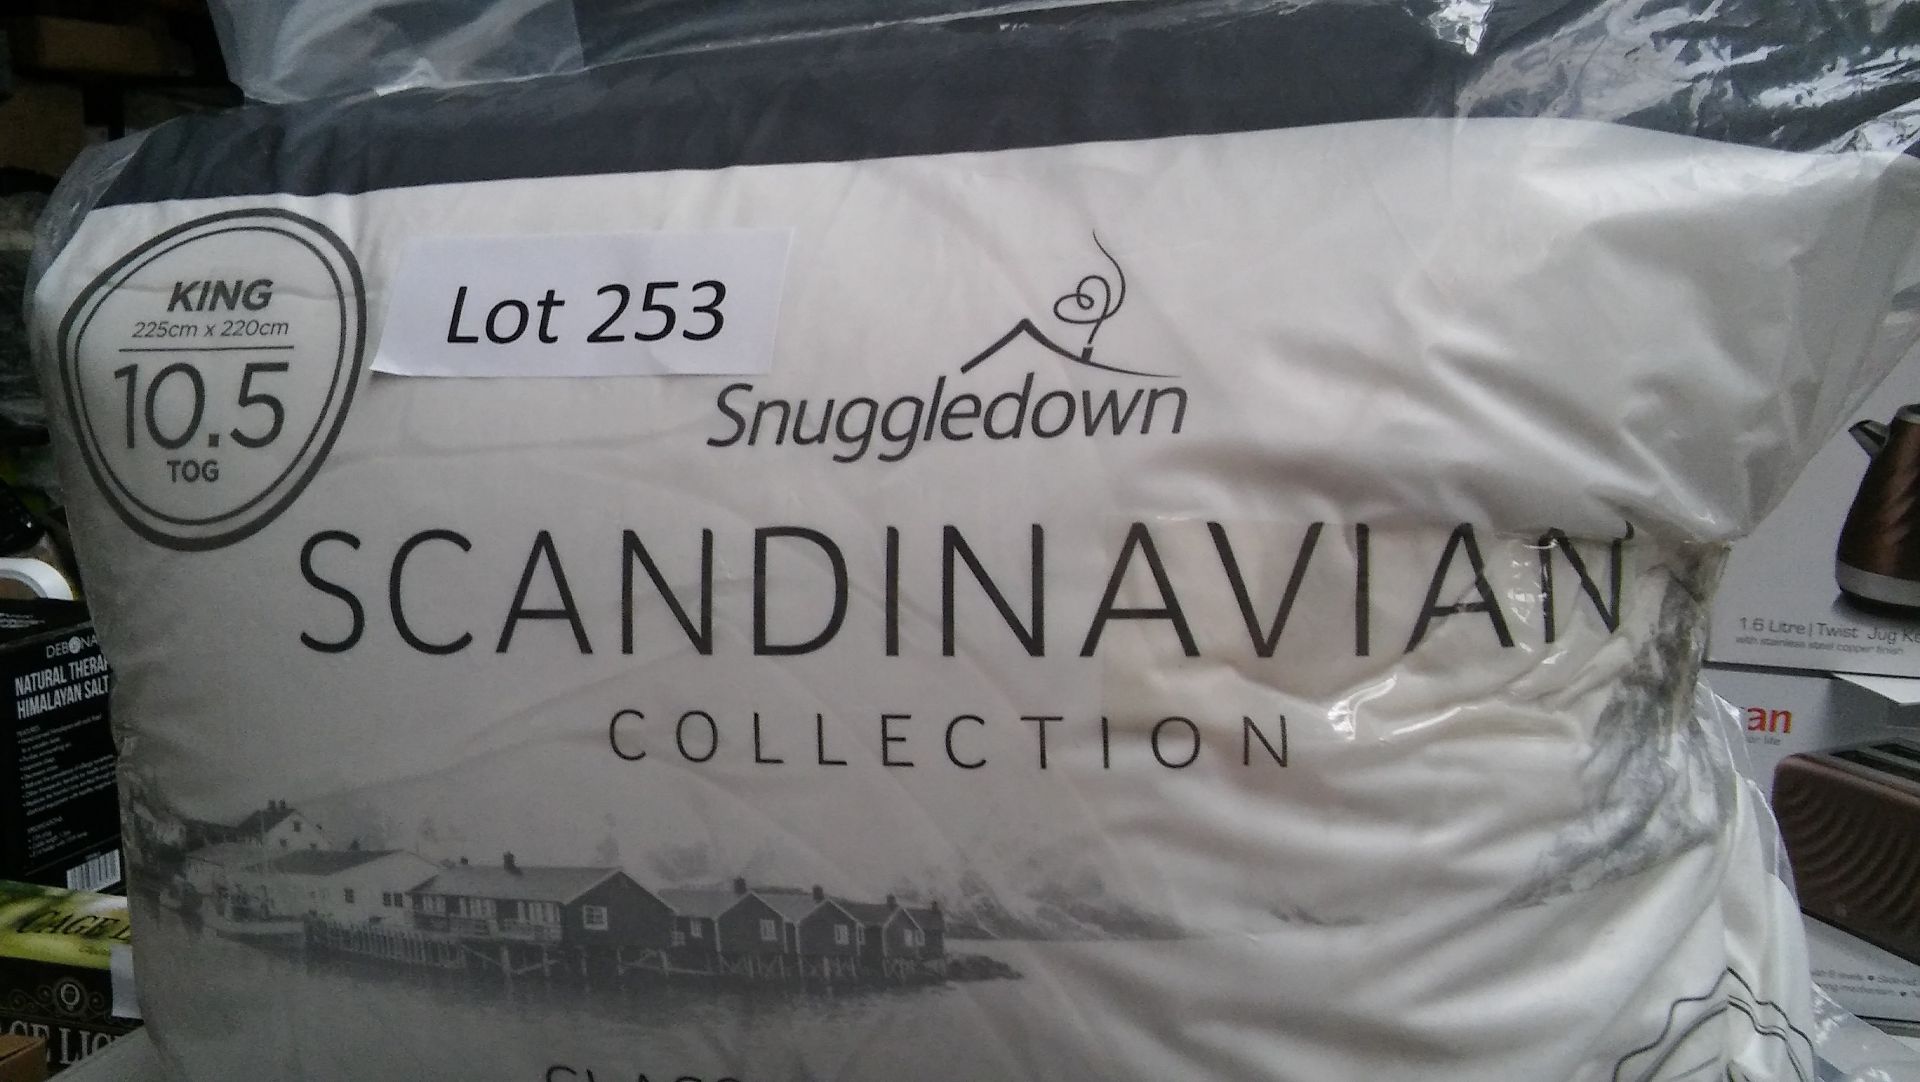 "Snuggledown Scandanavian Collection" kingsize 10.5 tog classic duck feather and down duvet. Bad